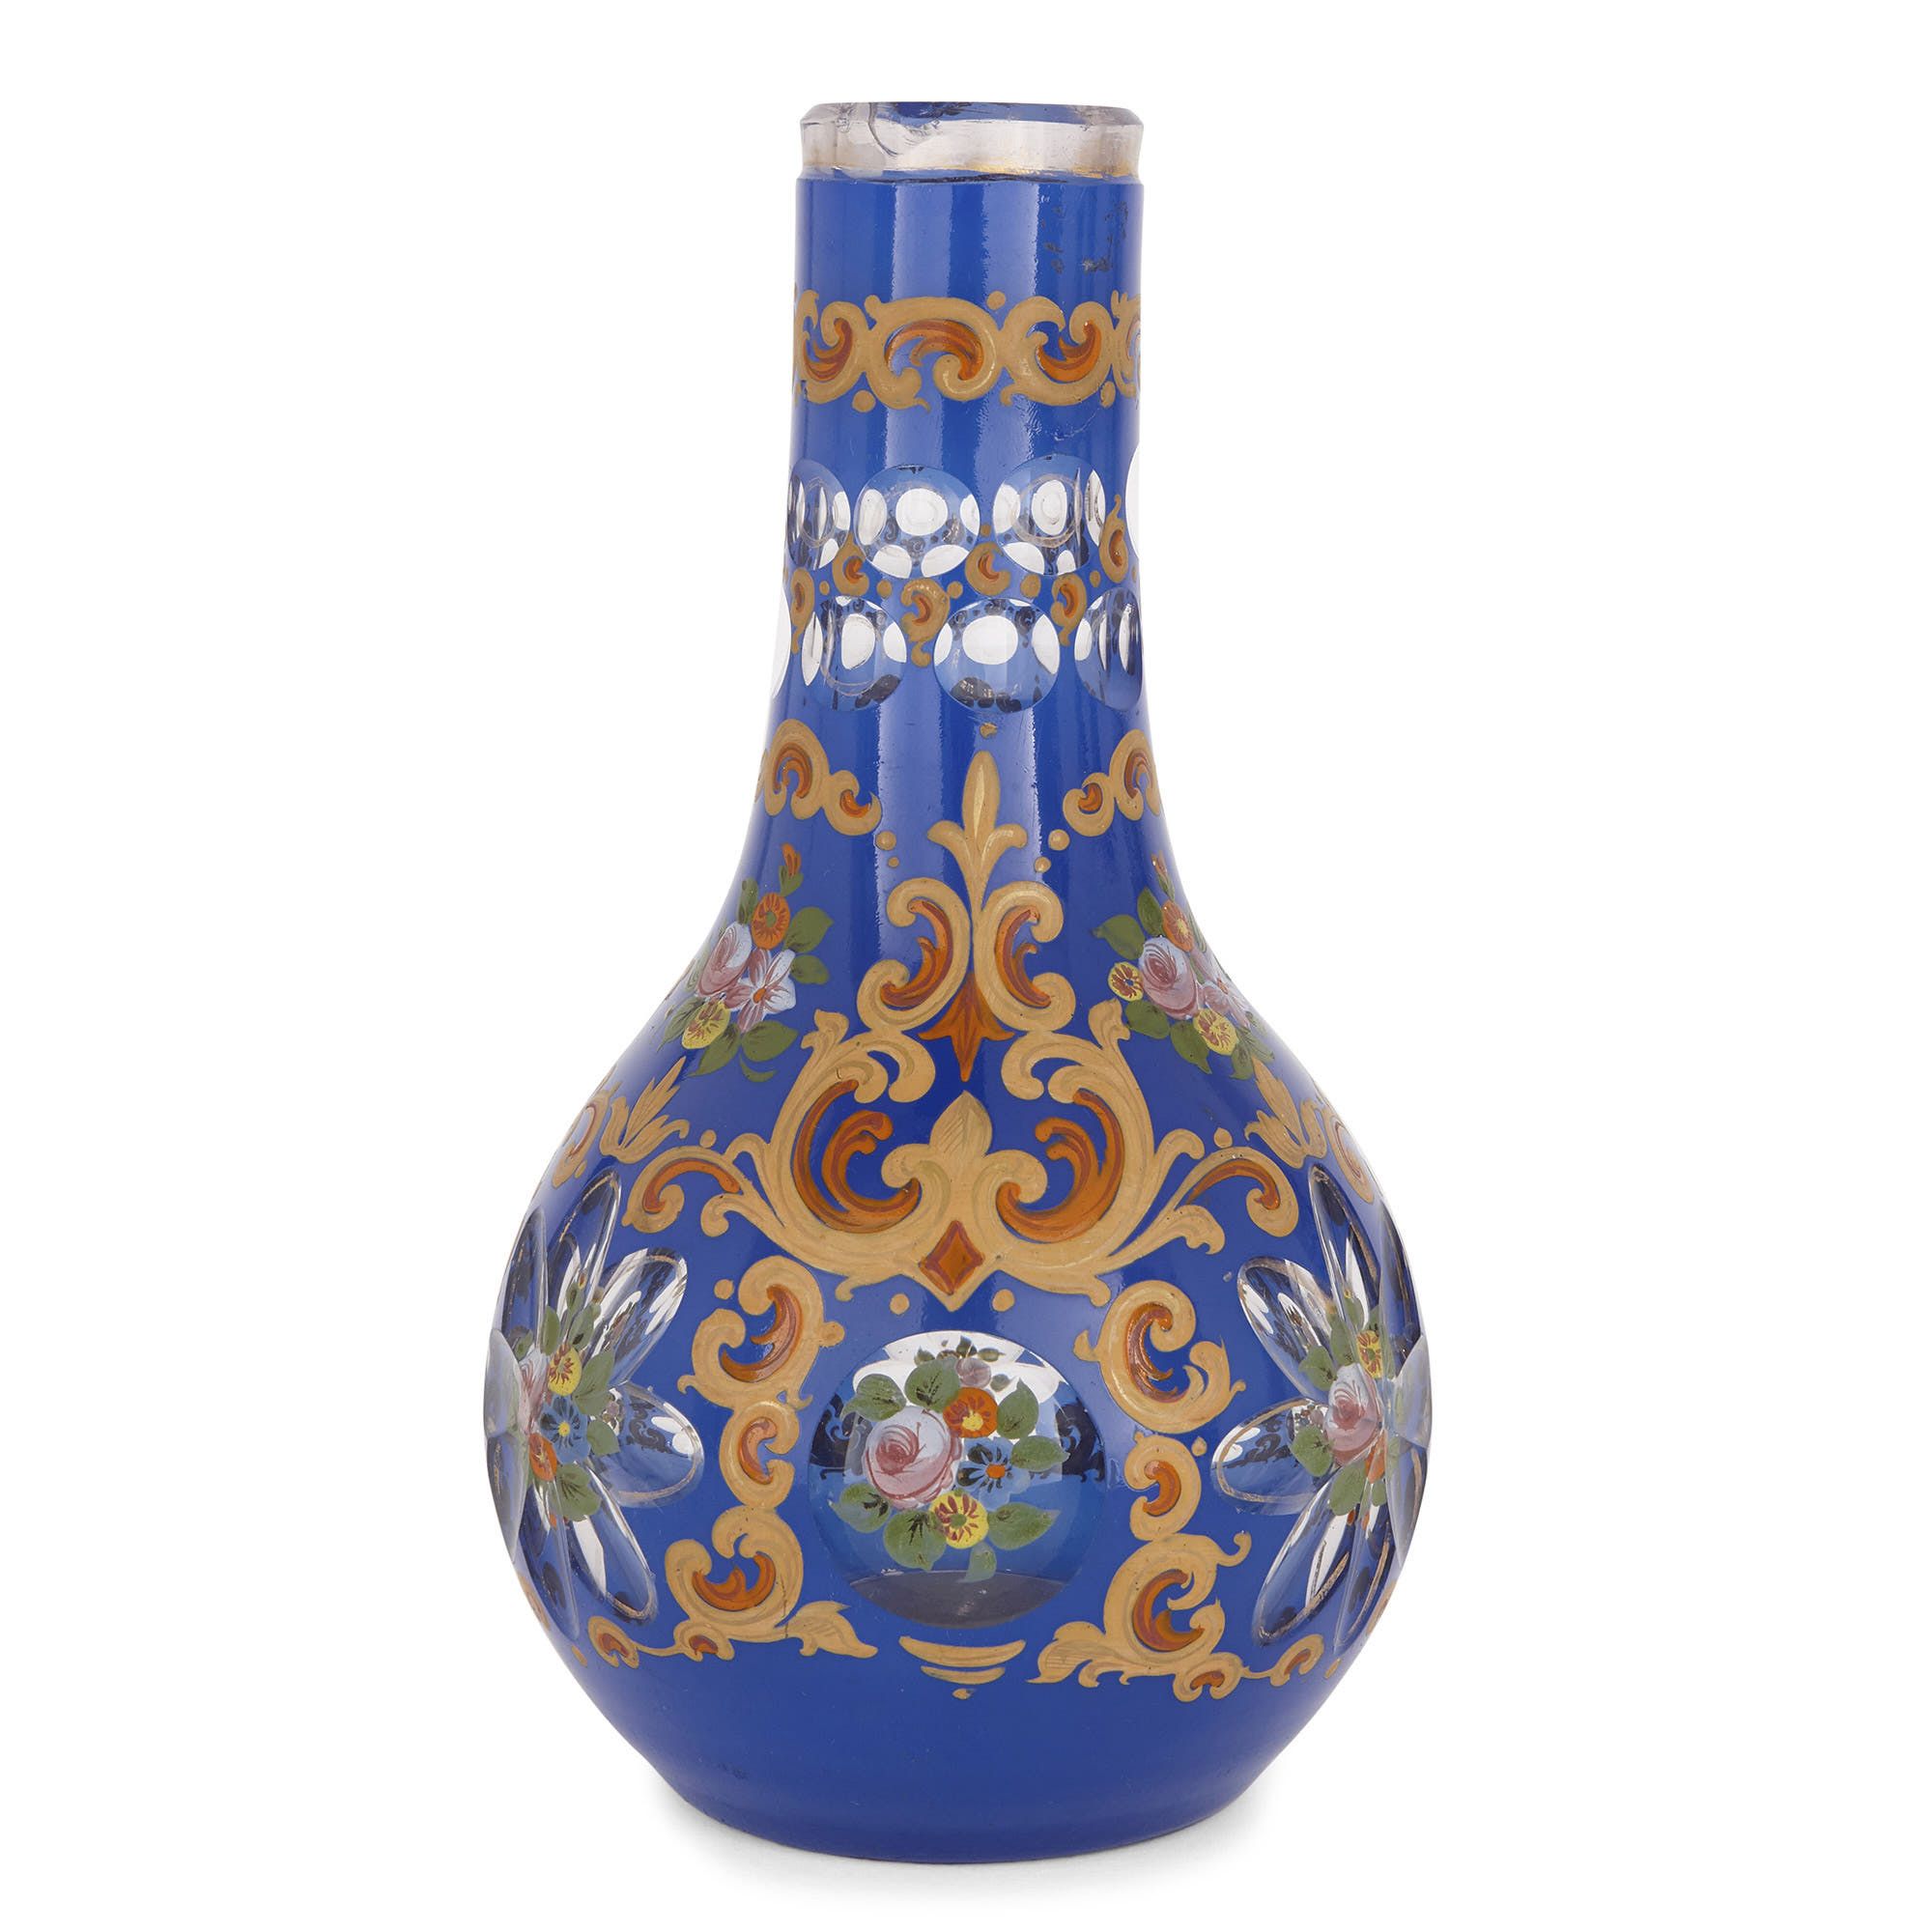 Collection of Bohemian Persian style glass objects | Mayfair Gallery